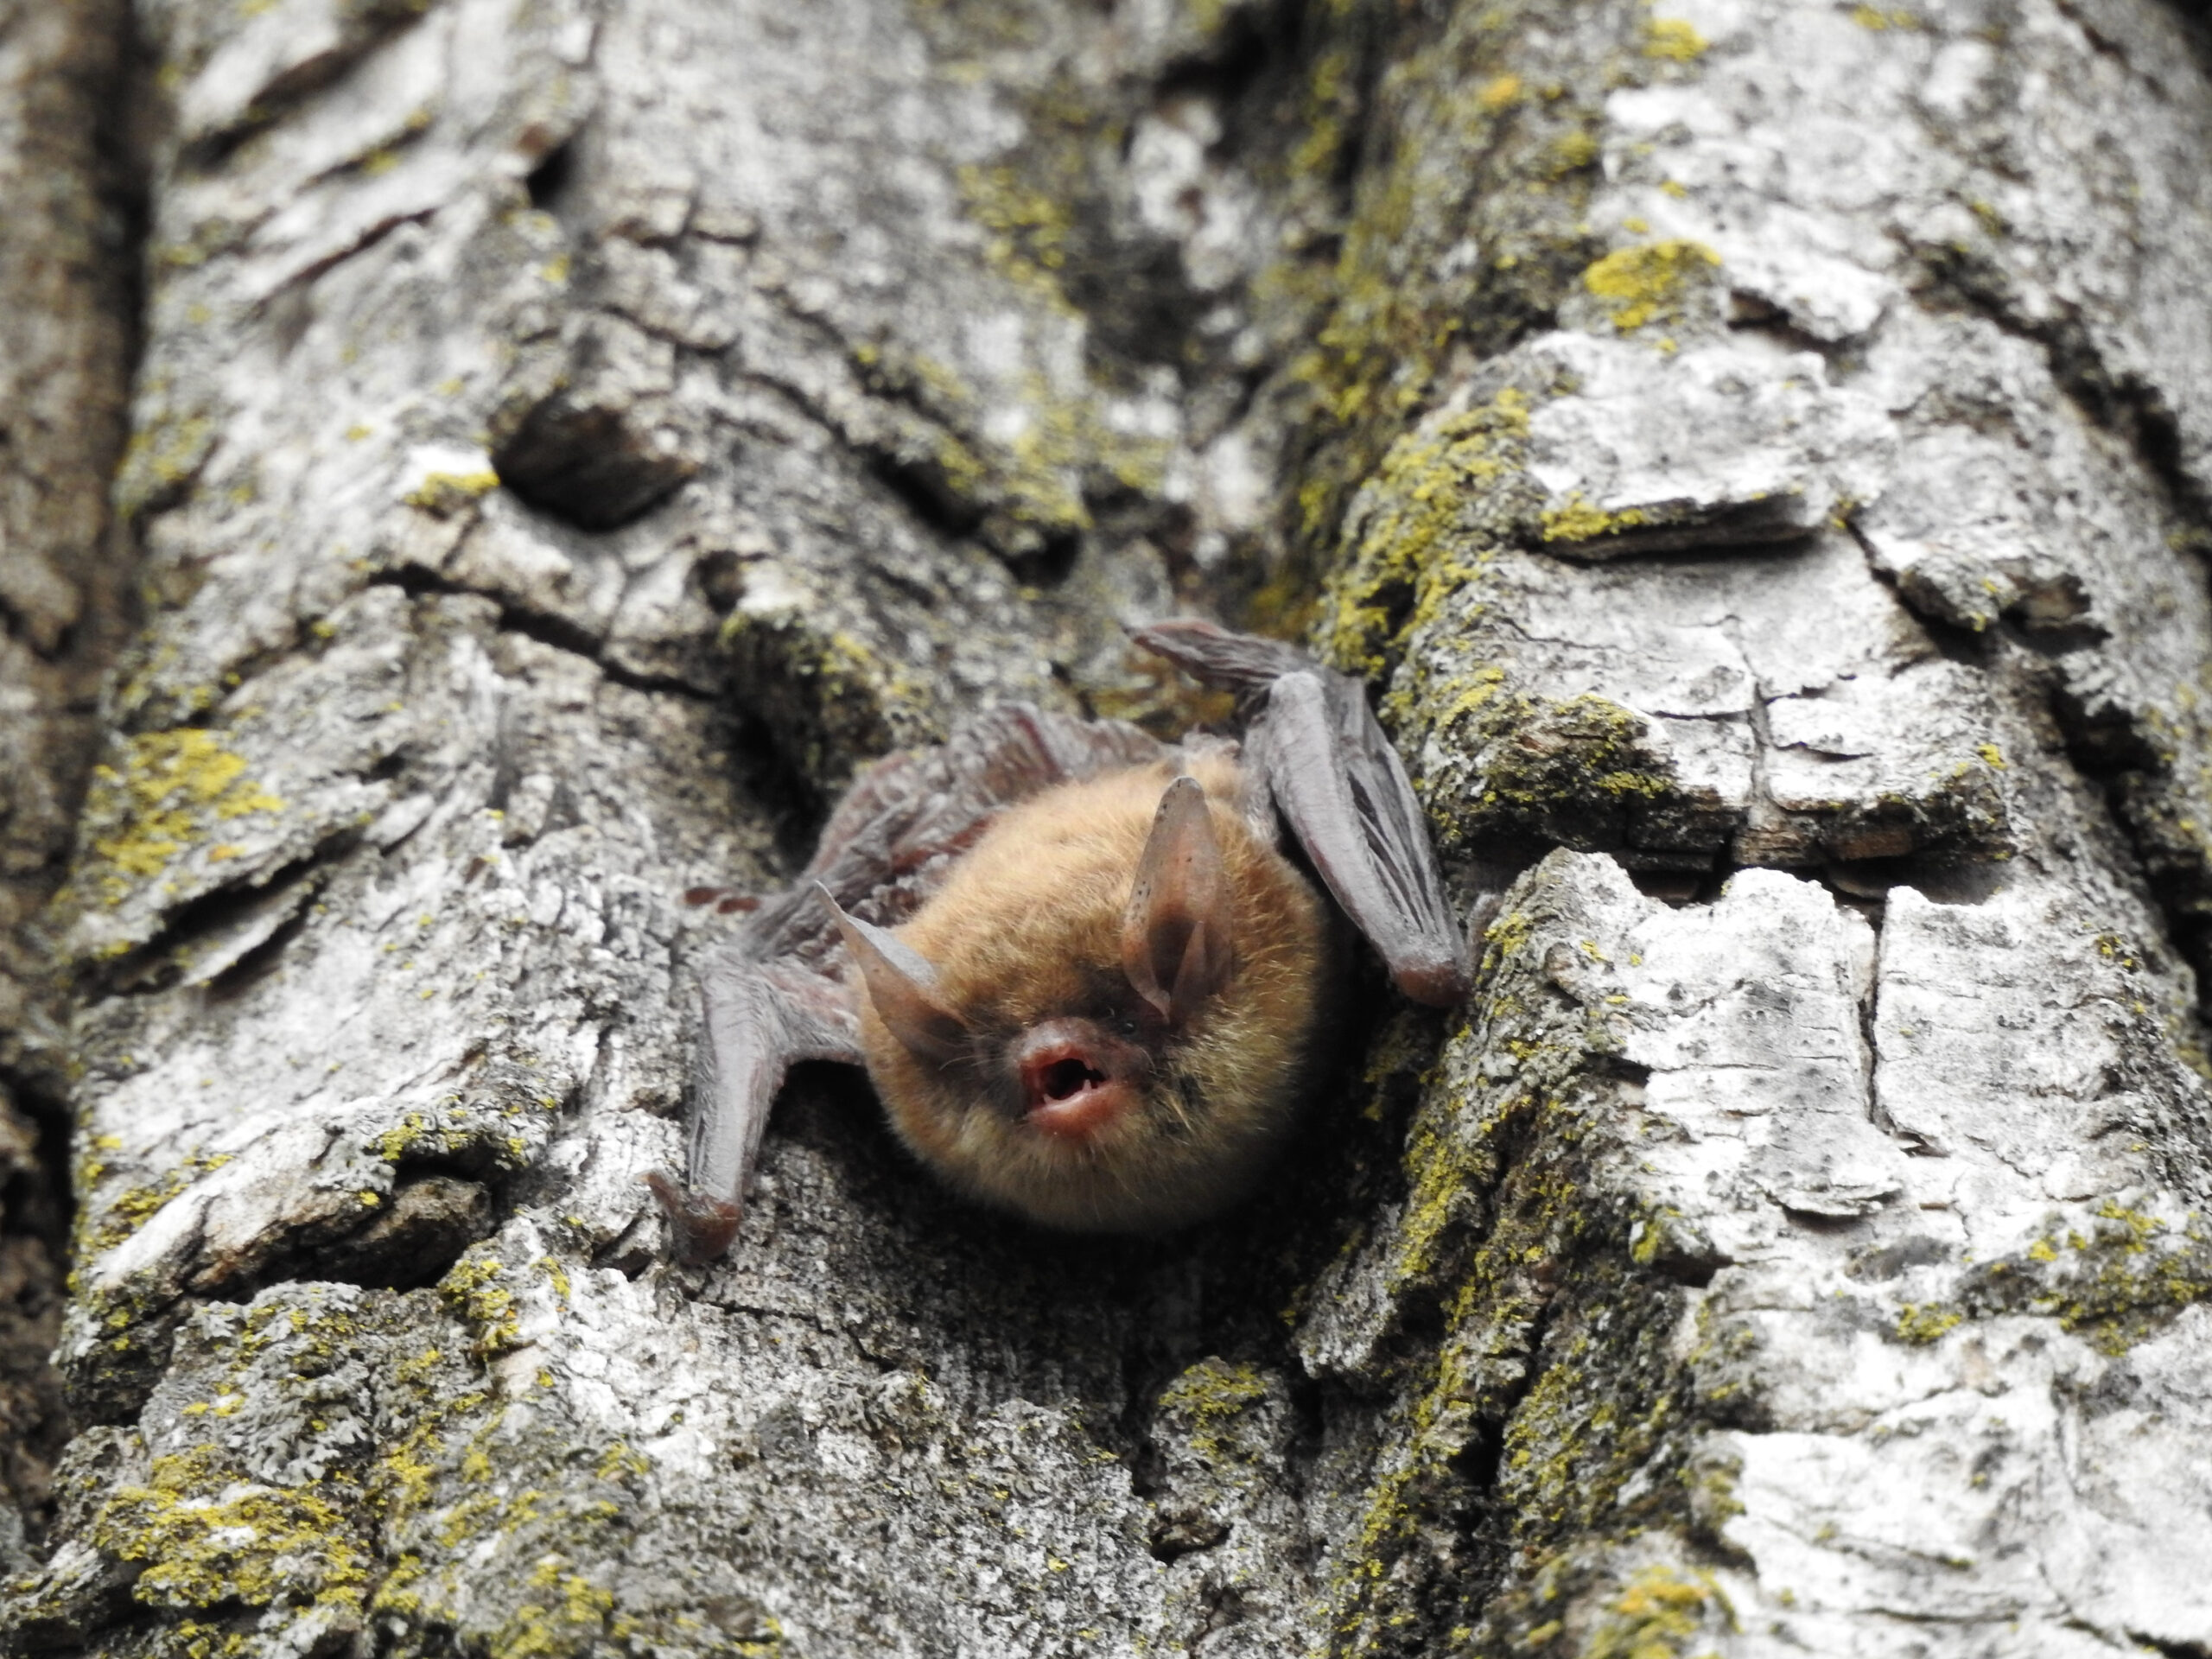 A small brown bat clings to a tree trunk.